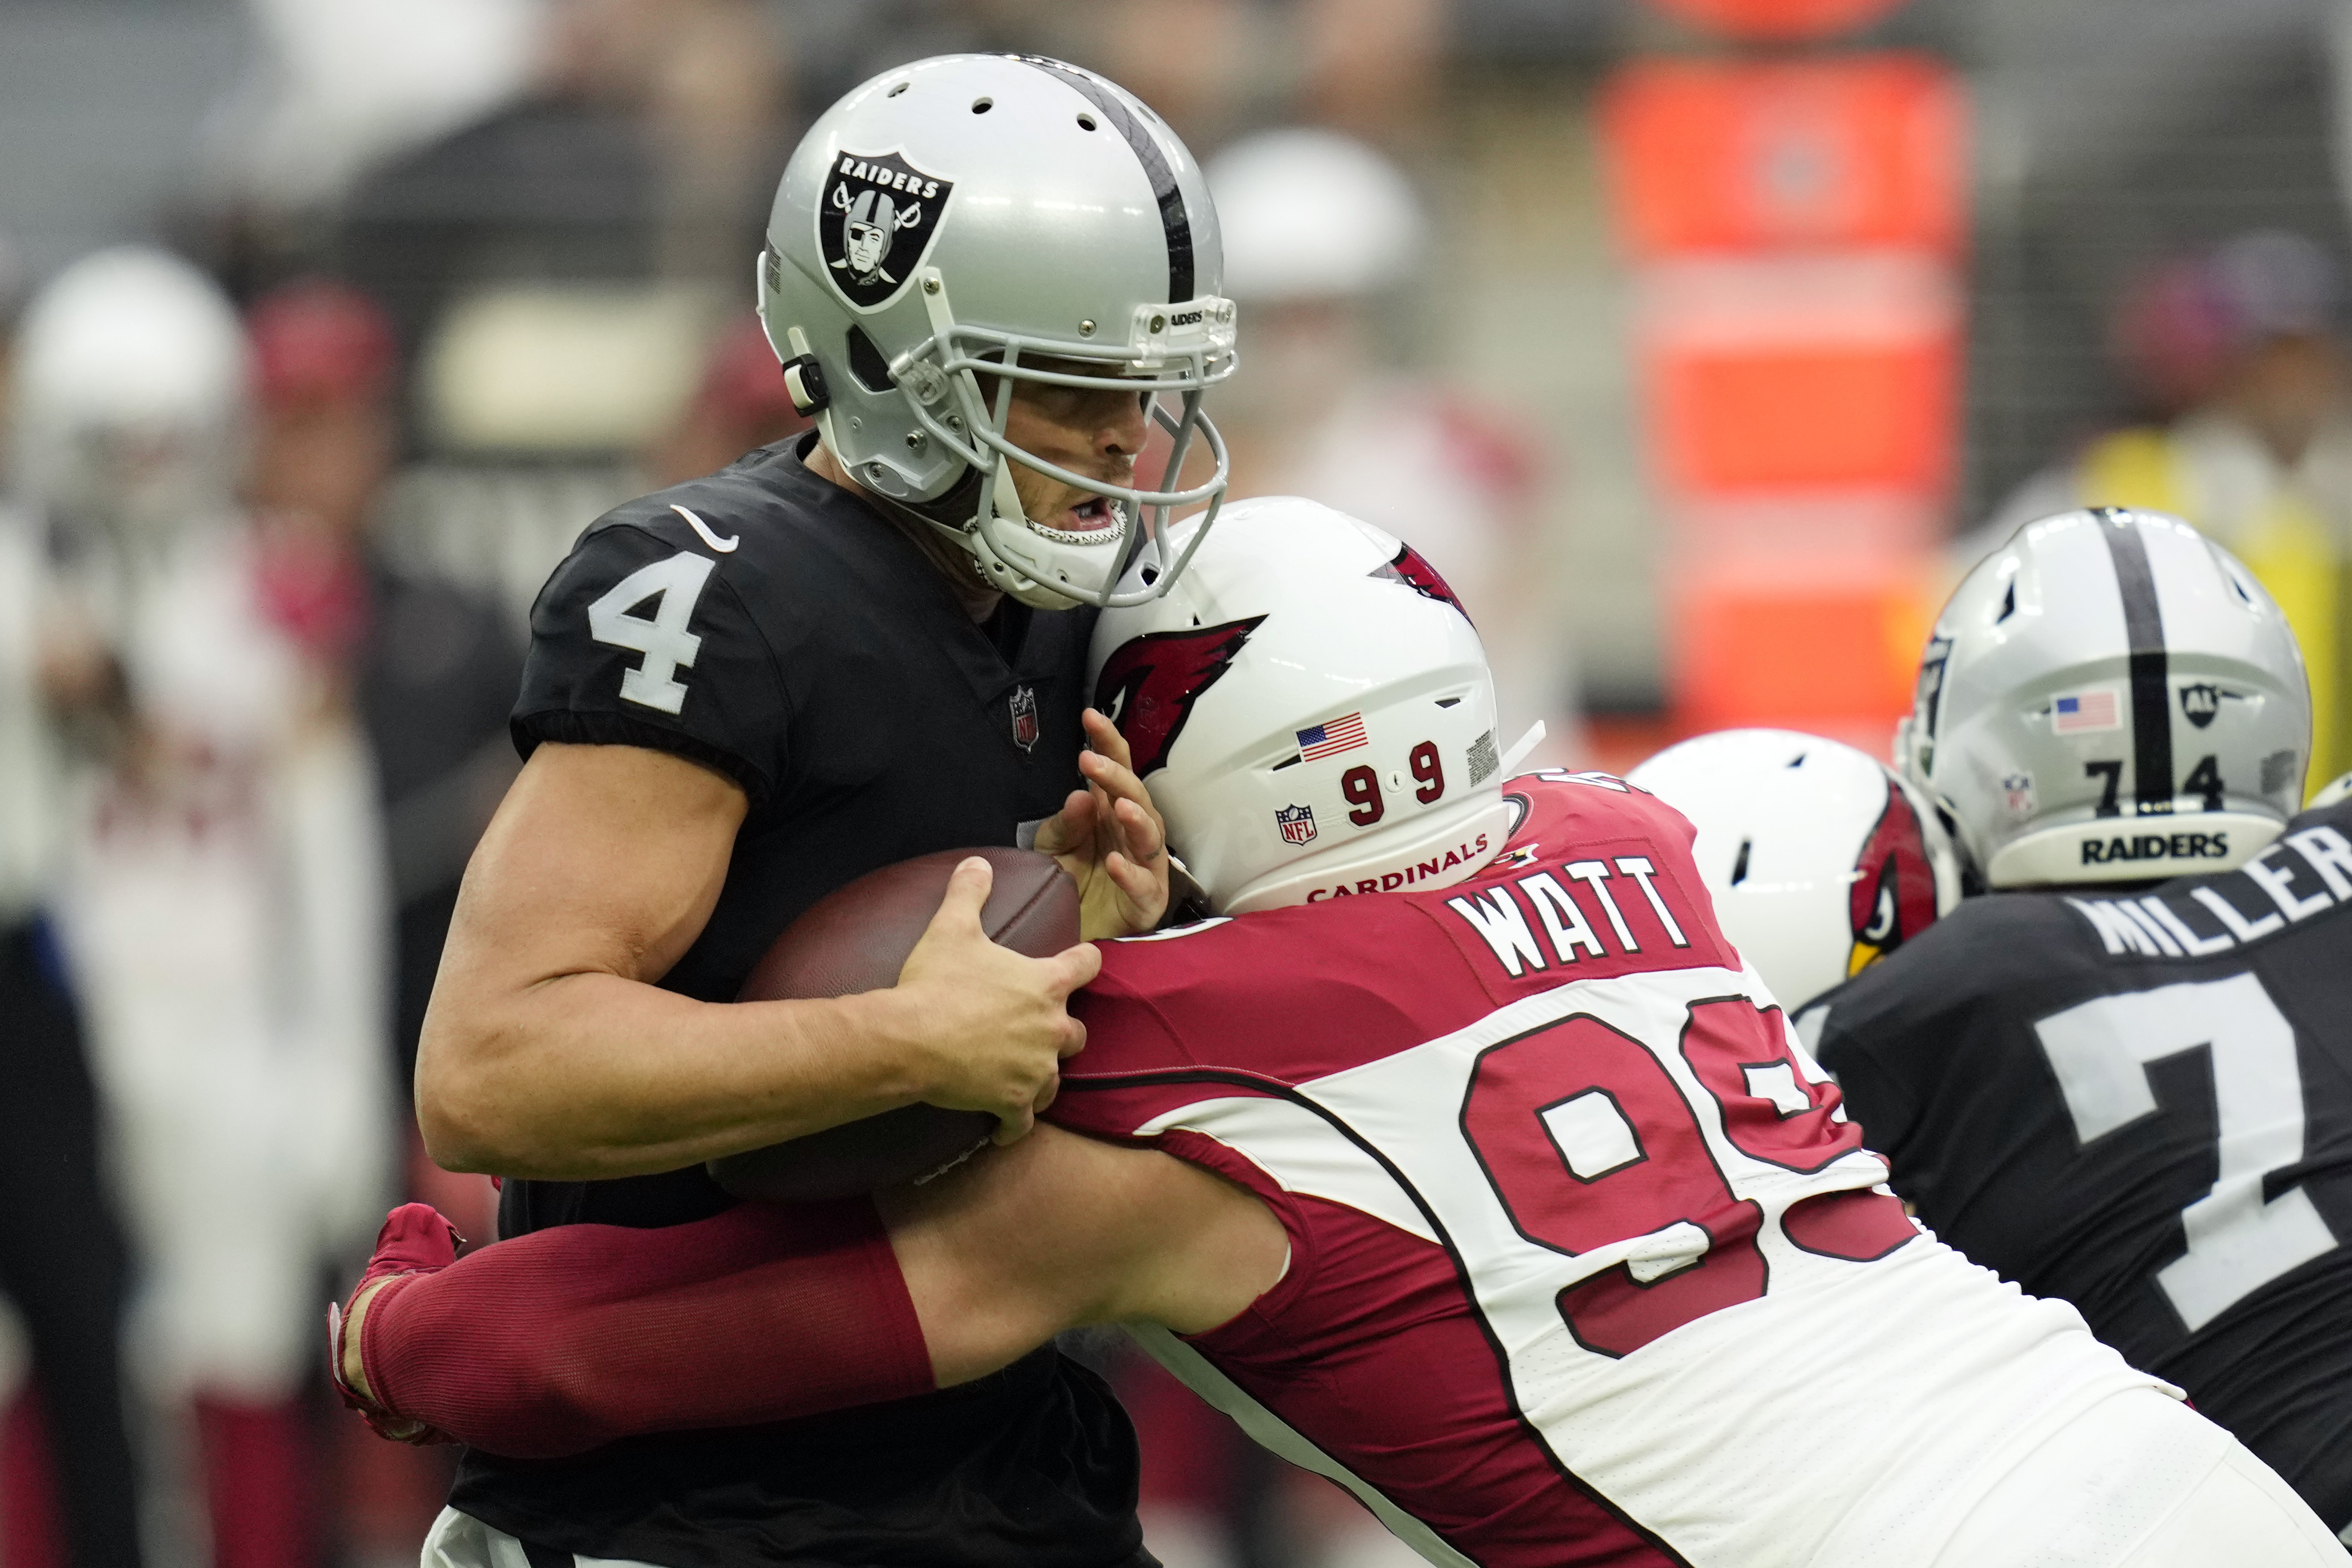 Cardinals vs. Raiders final score: What we learned in the 30-23